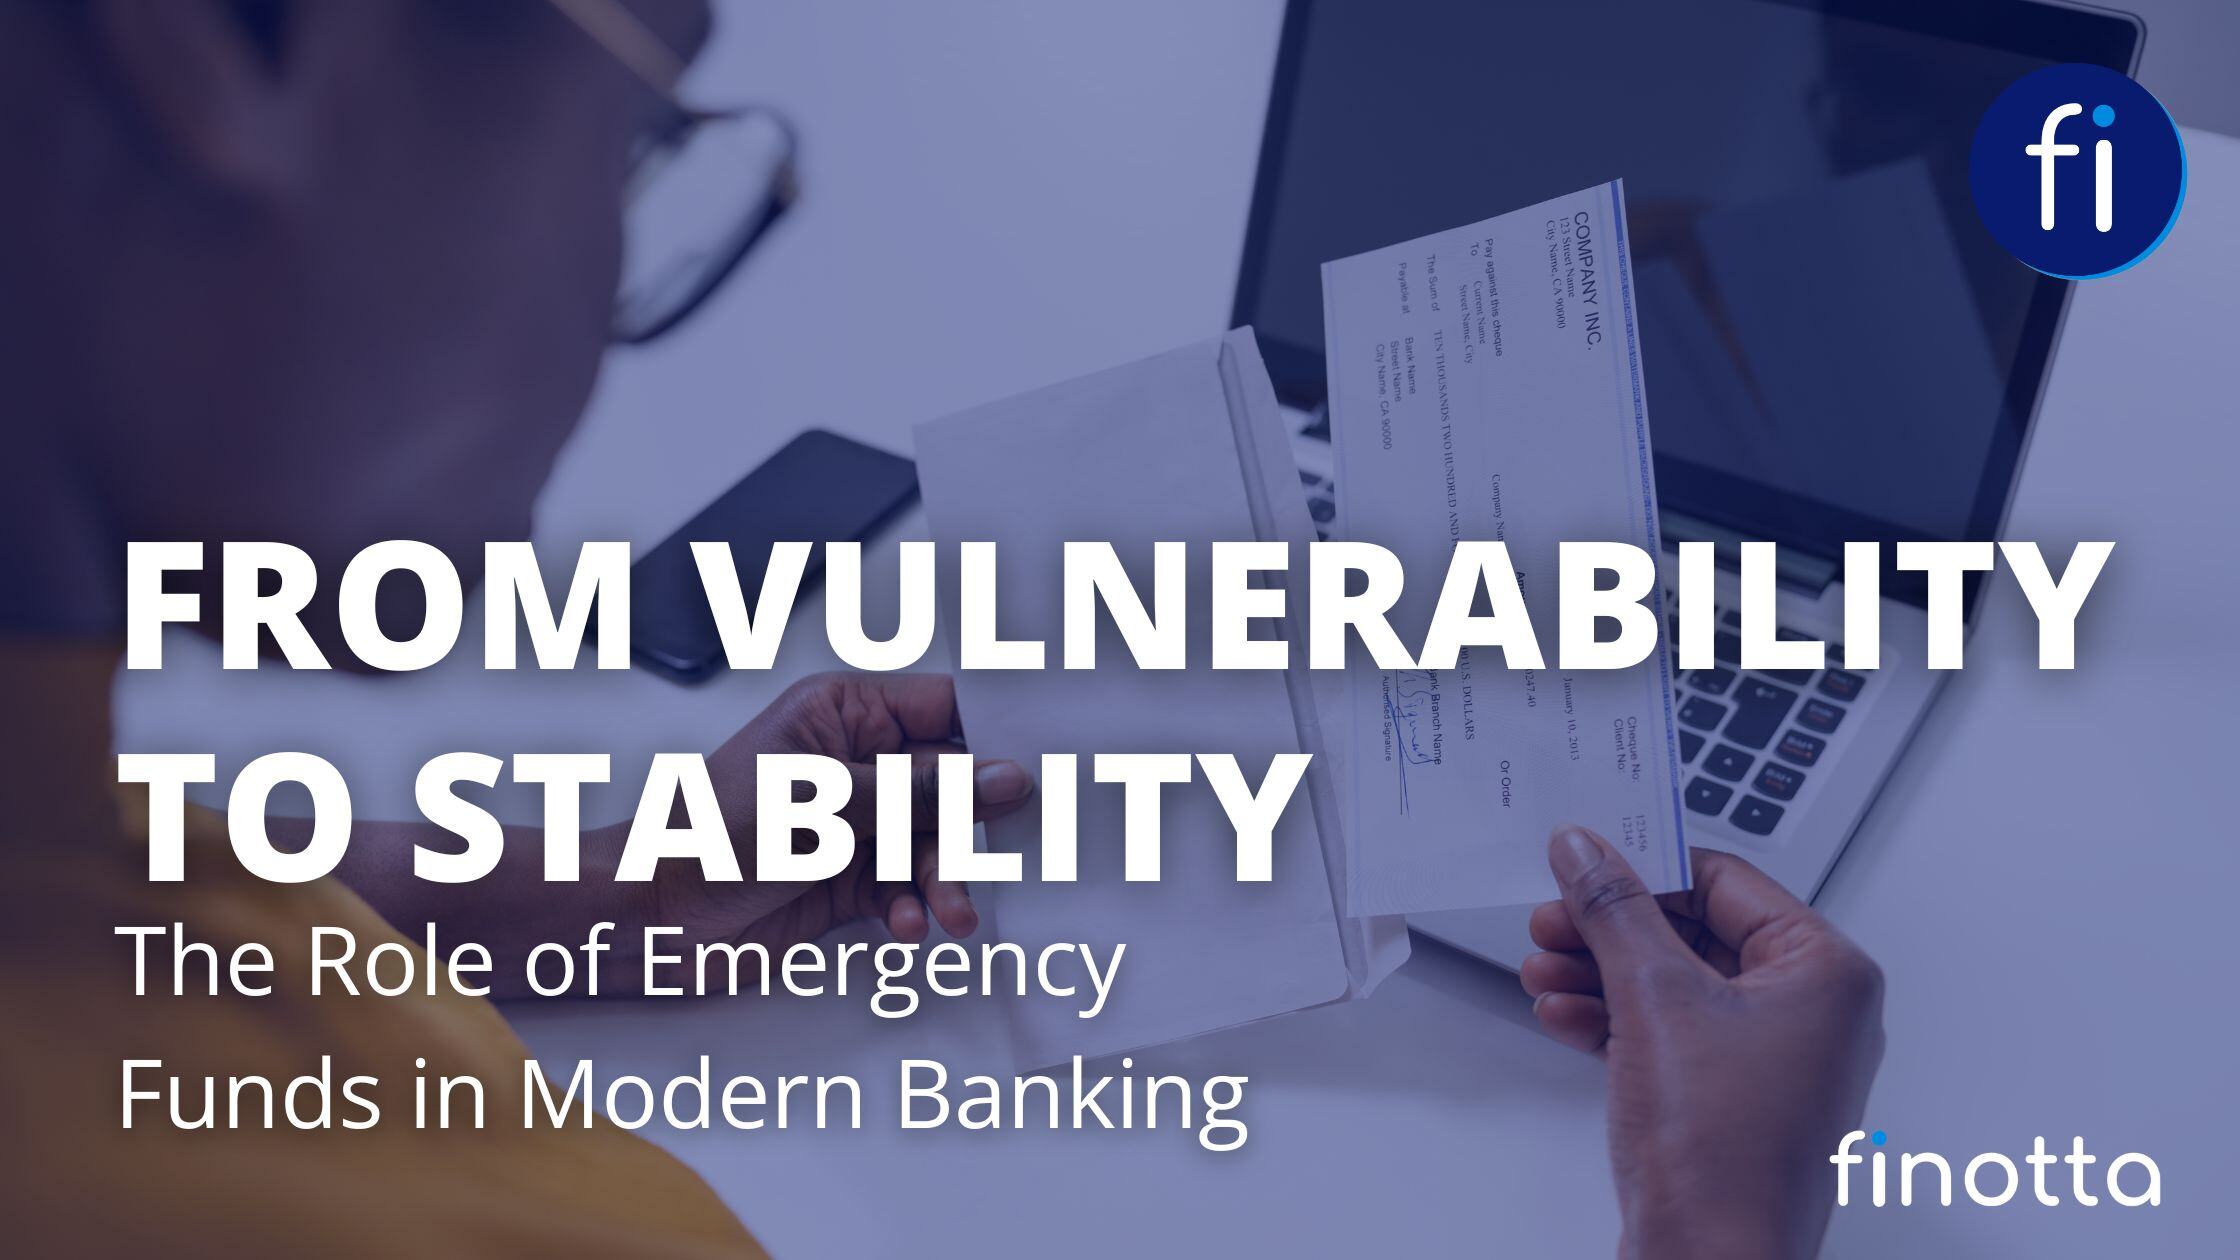 From Vulnerability to Stability: The Role of Emergency Funds in Modern Banking